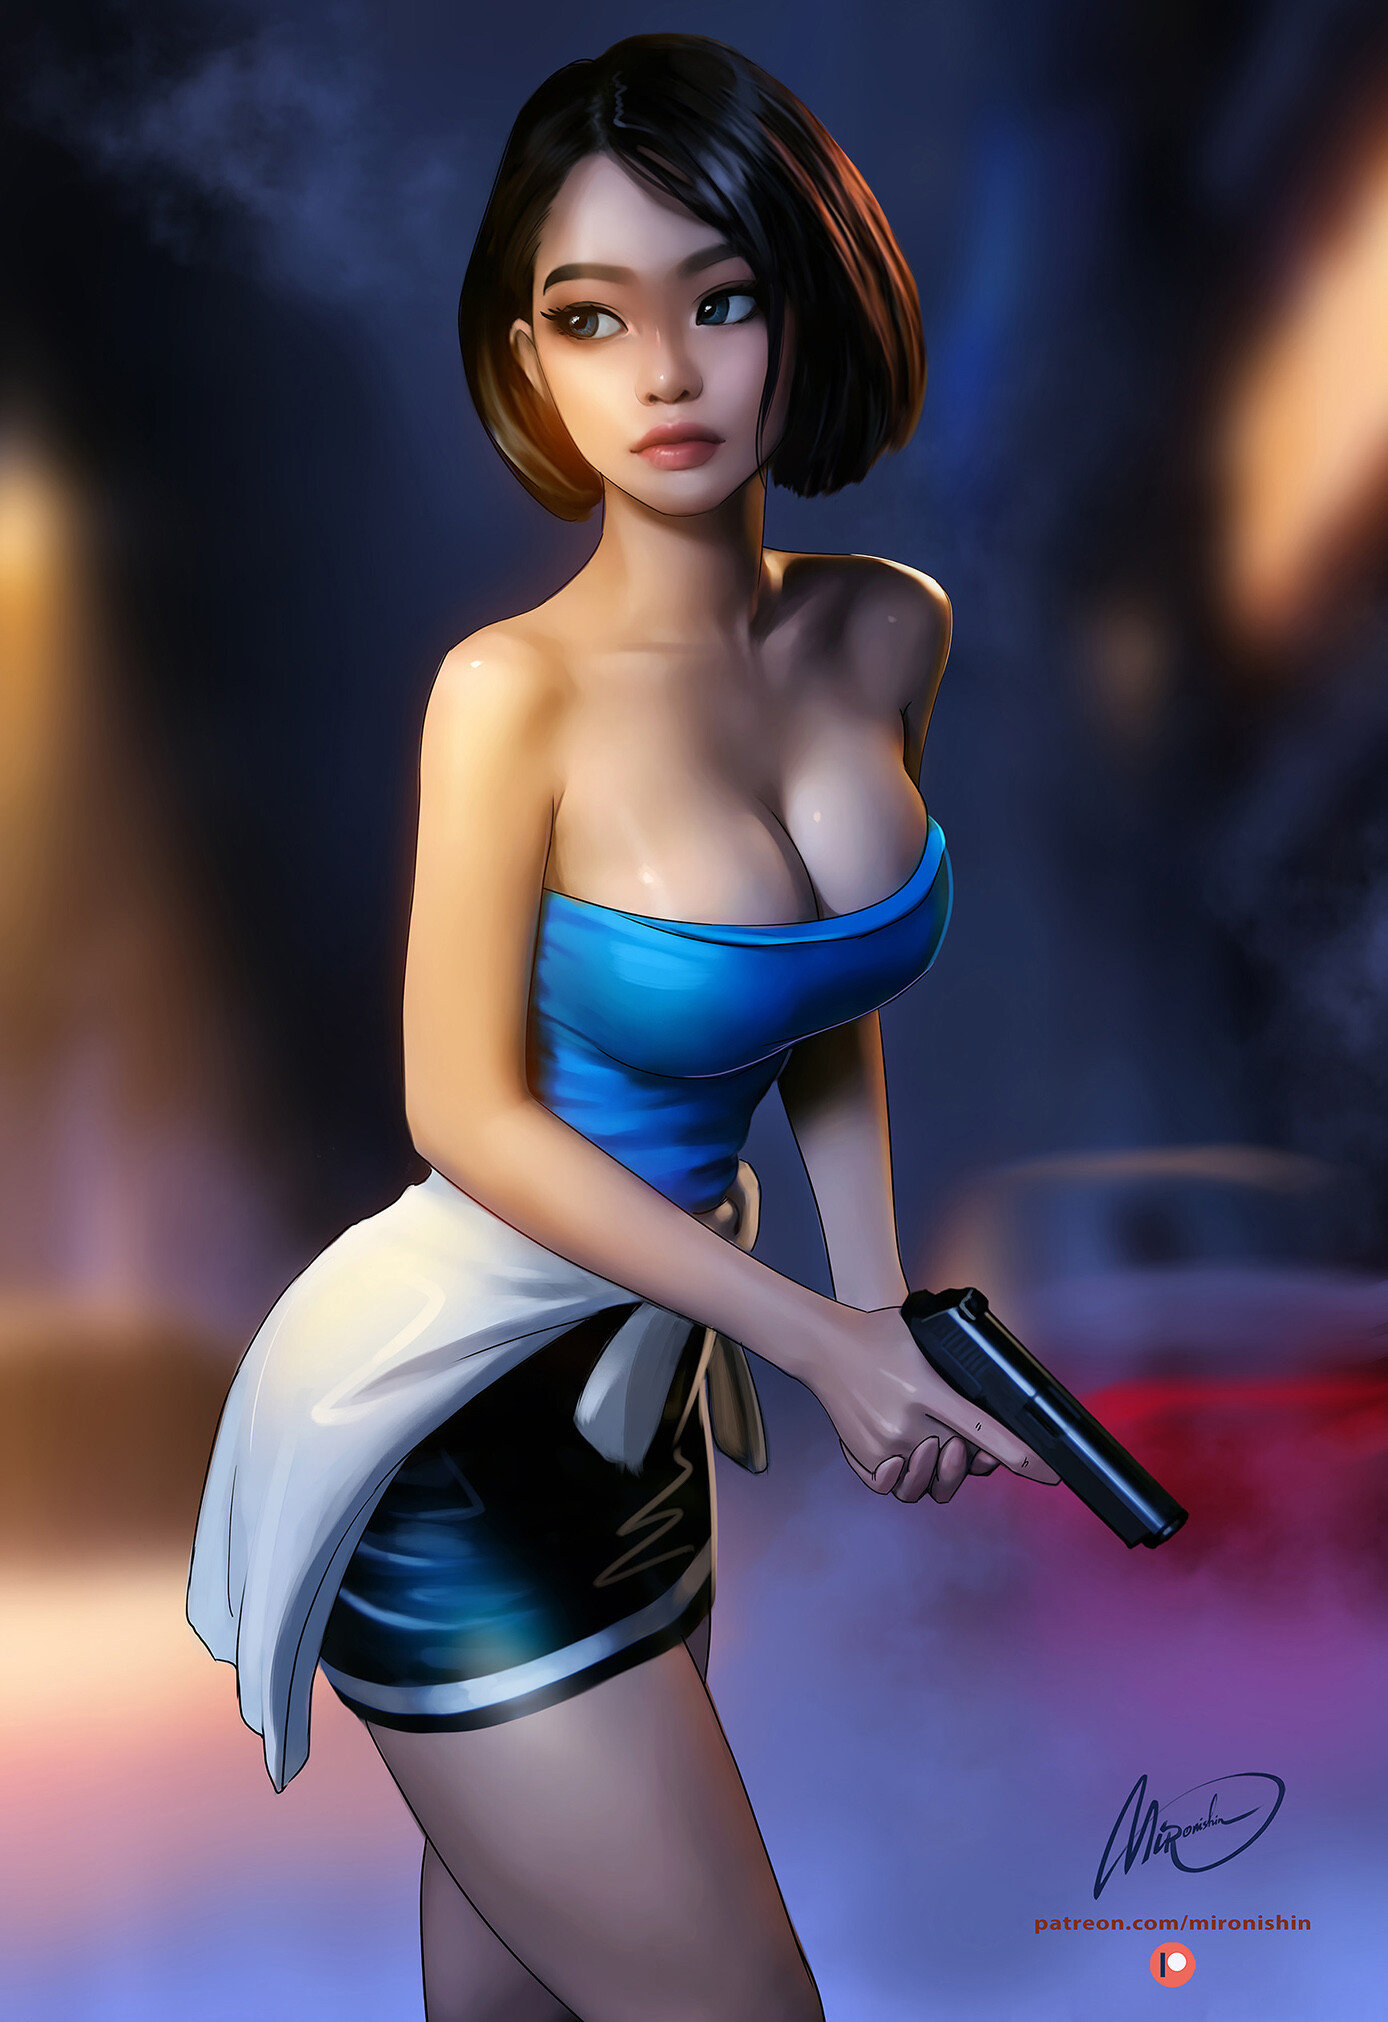 General 1388x2022 Mironishin Story drawing Jill Valentine Resident Evil dark hair blue clothing looking away depth of field cleavage girls with guns video games video game girls video game characters